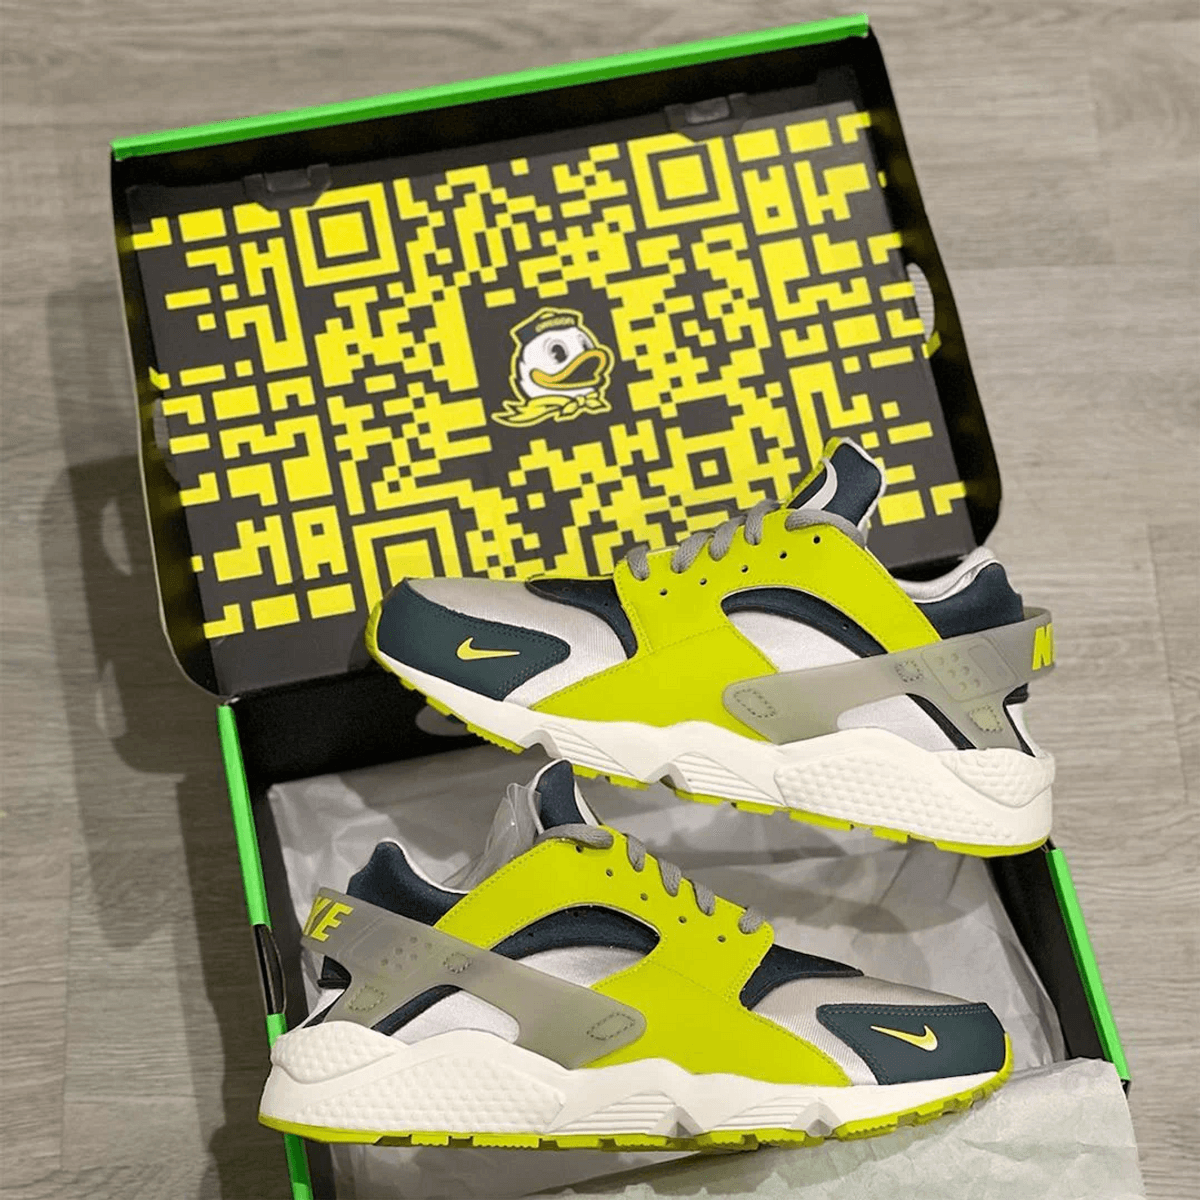 Exclusive Nike Air Huarache PE Arrives at The University Oregon's Athletic Department